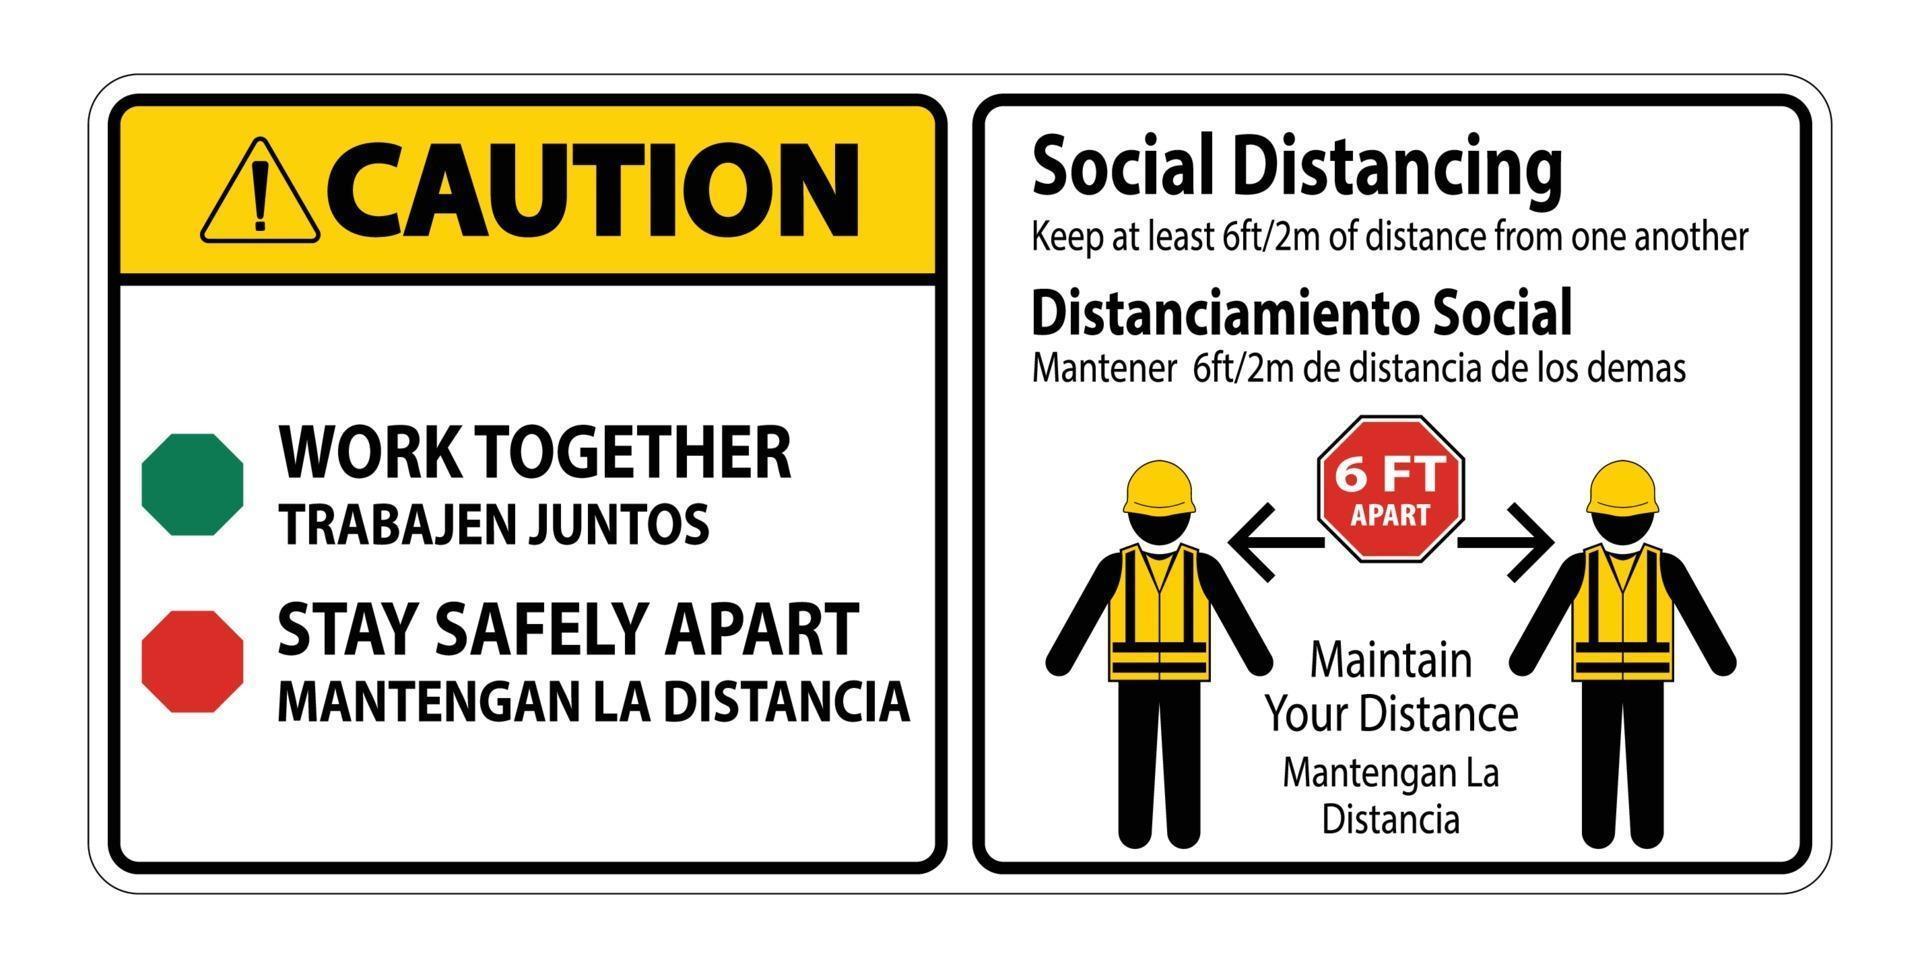 Caution Bilingual Social Distancing Construction Sign Isolate On White Background,Vector Illustration EPS.10 vector